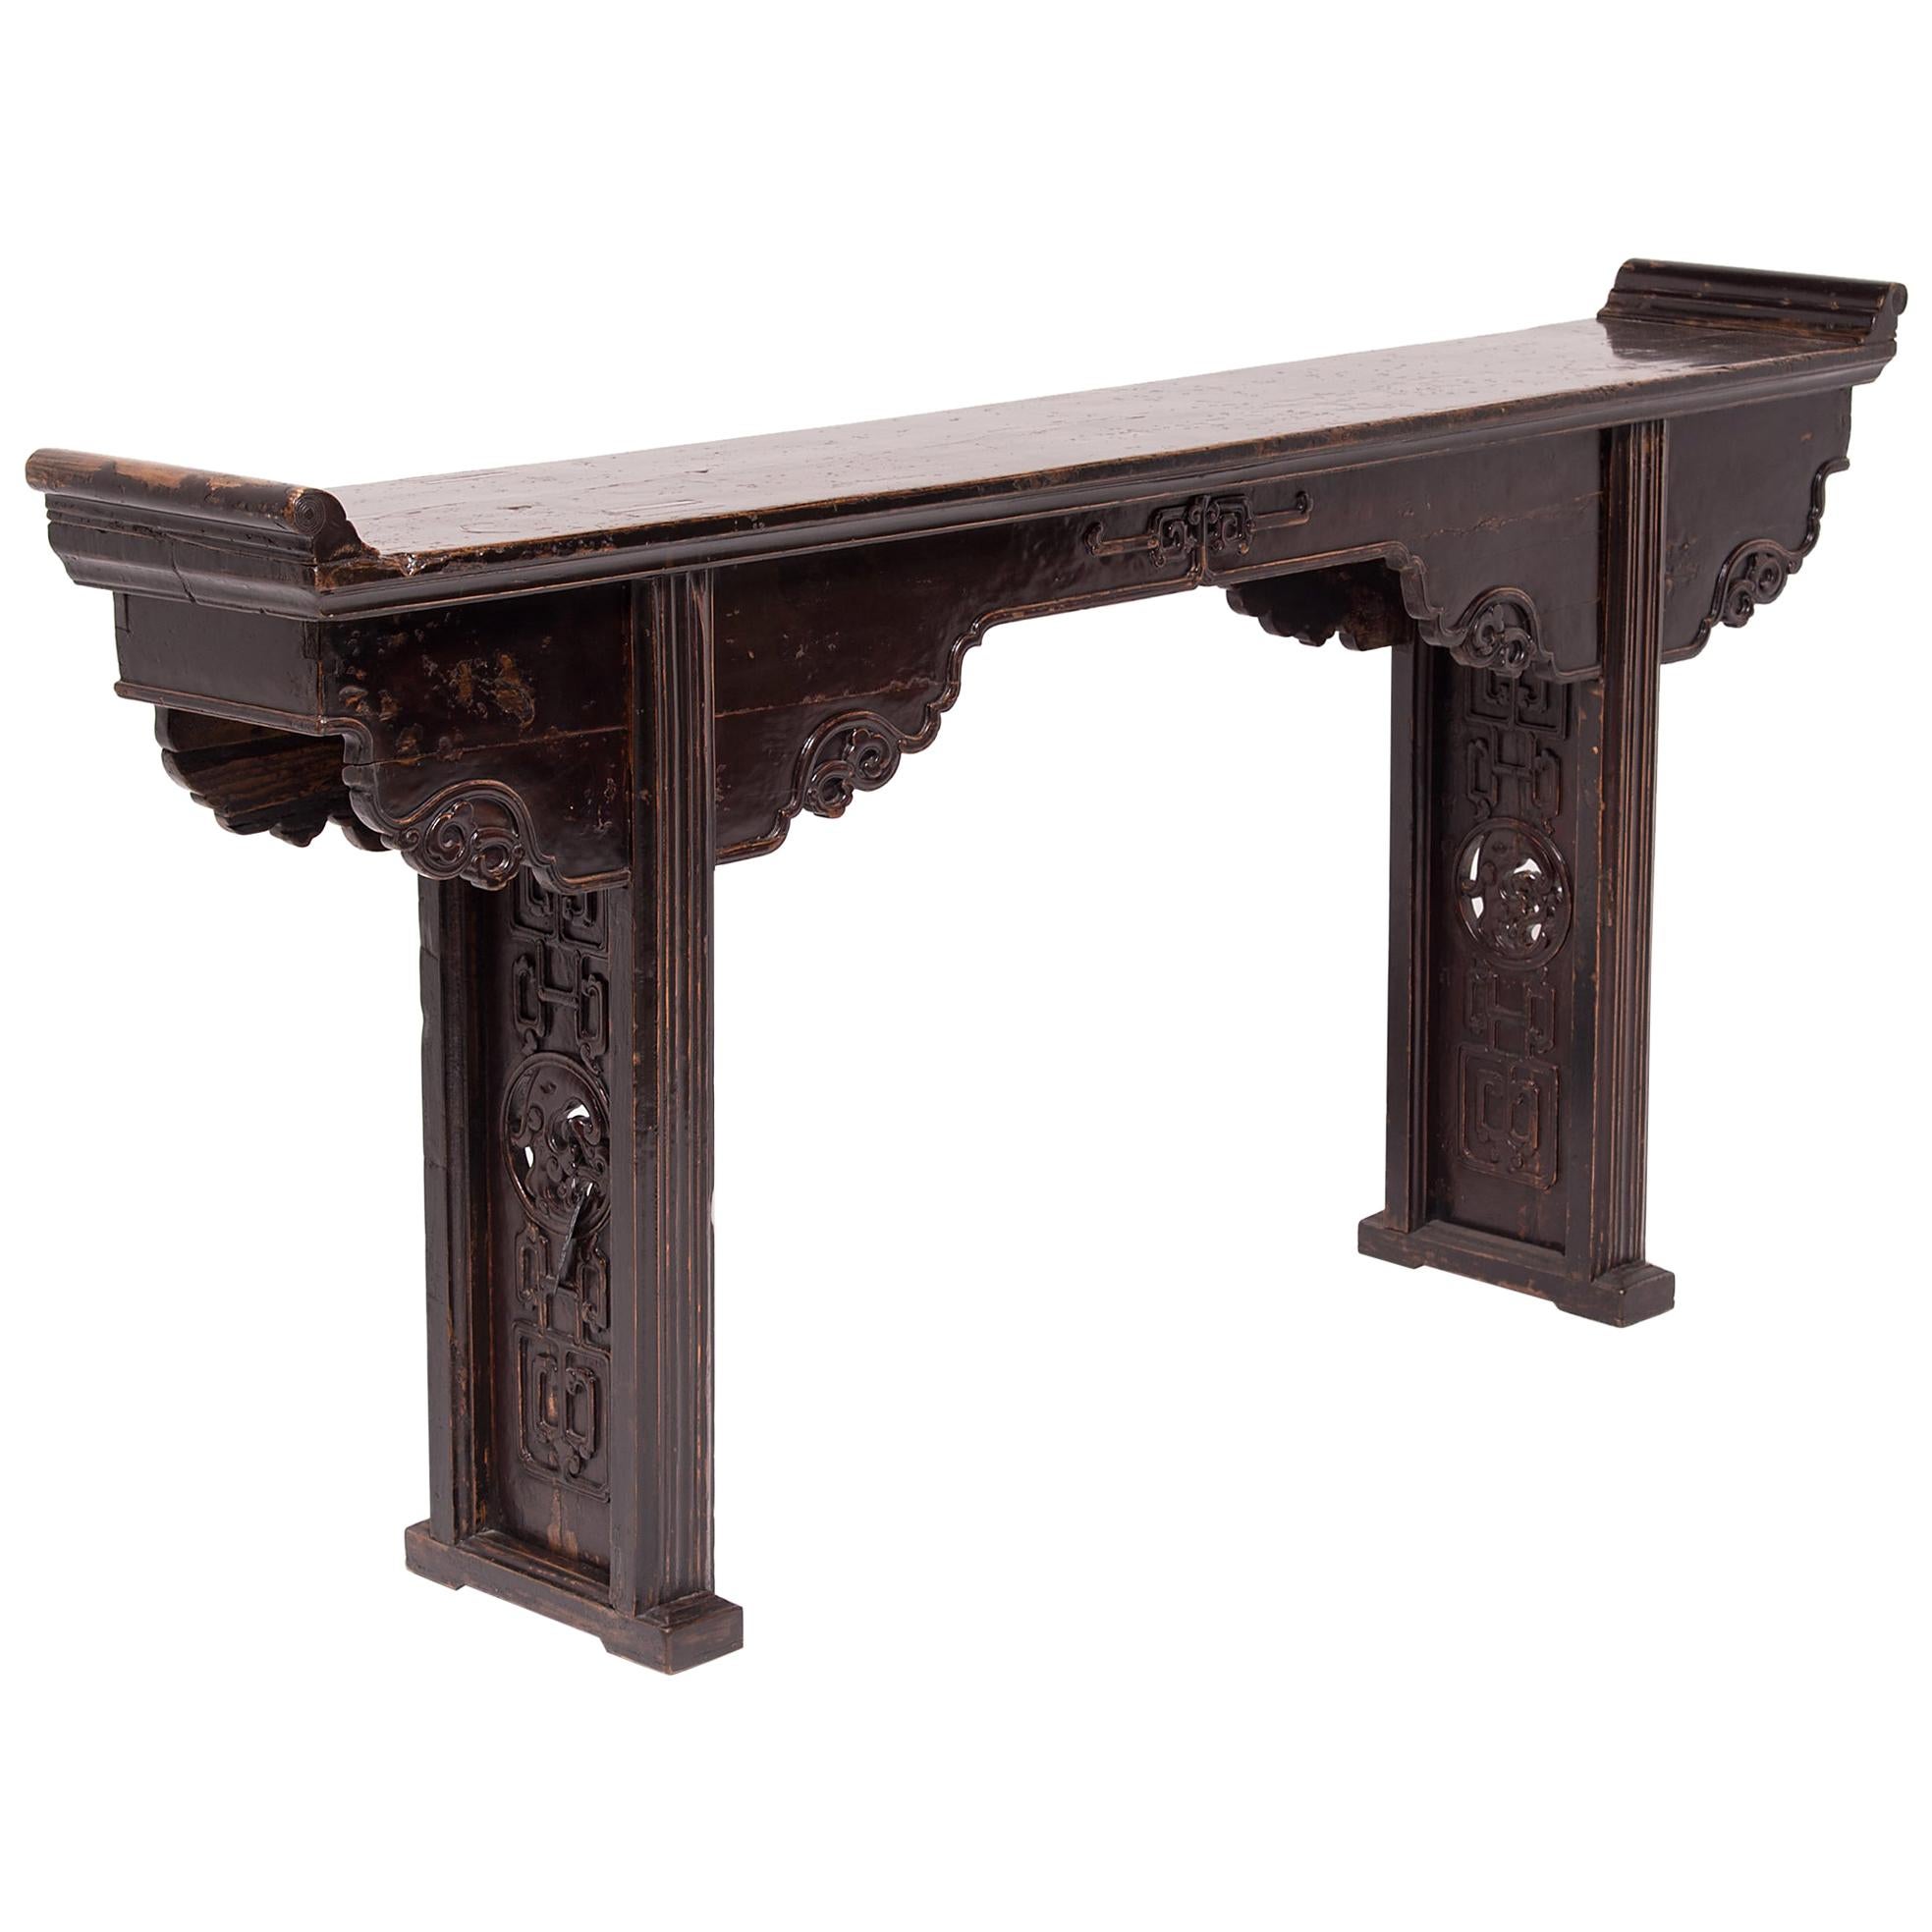 Chinese Shallow Altar Table, c. 1850